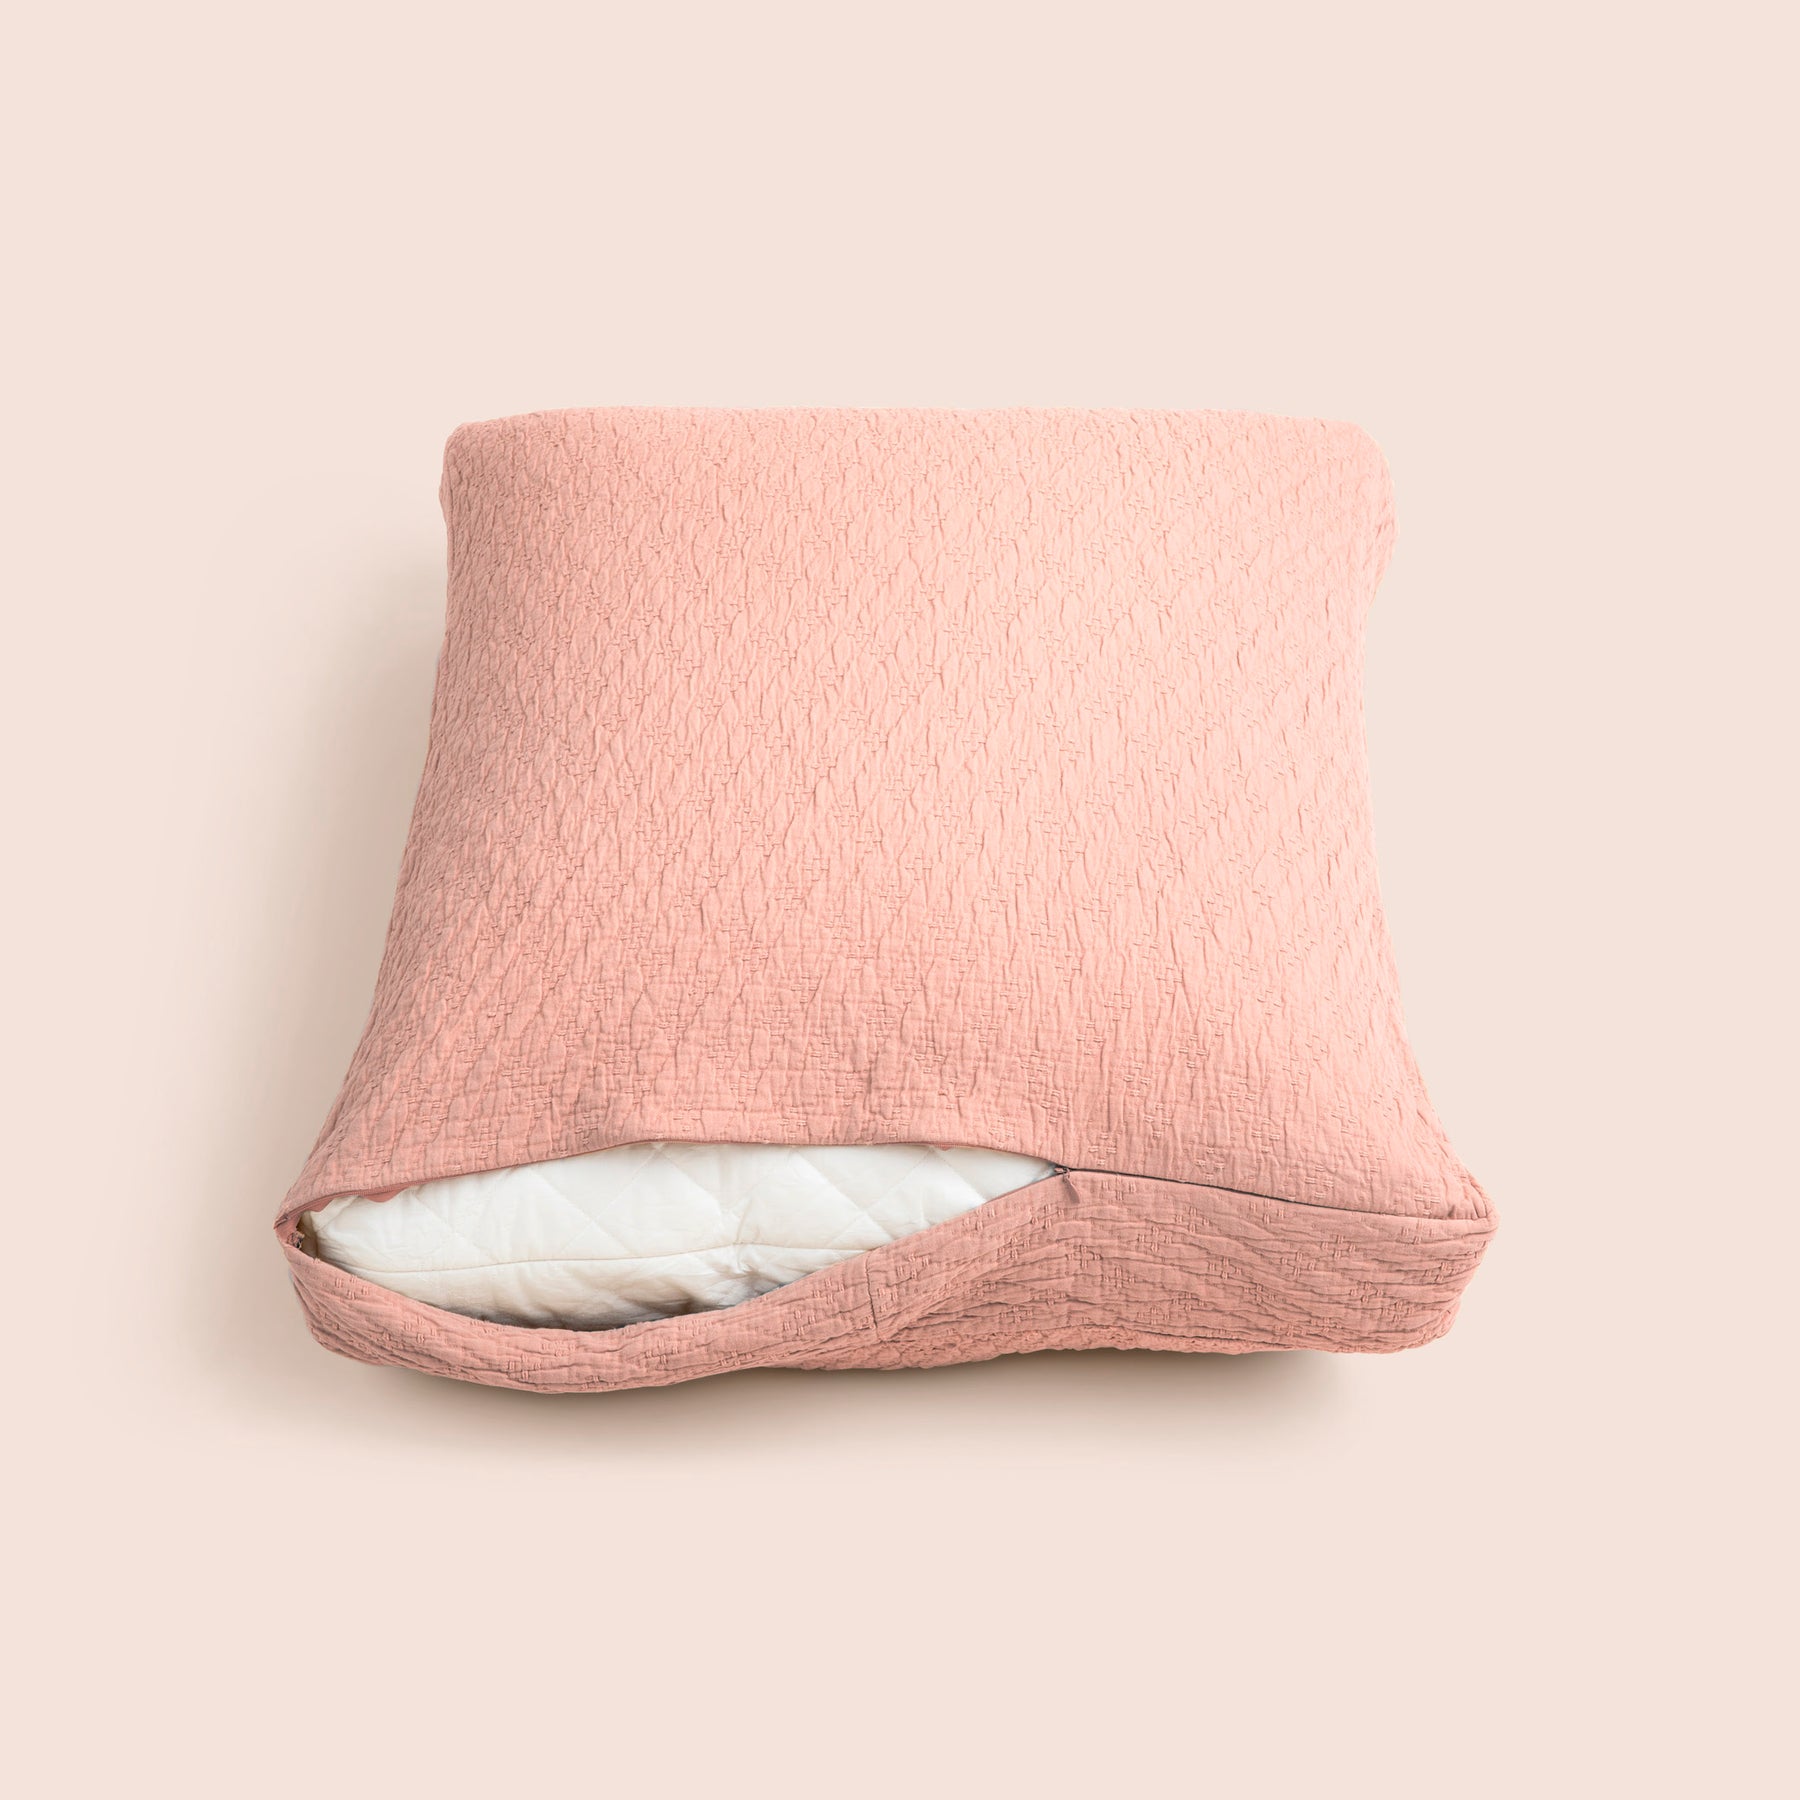 Image of the Pink Sandstone Wave Meditation Cushion Cover showcasing a slightly opened zipper with a meditation cushion inside on a light pink background 